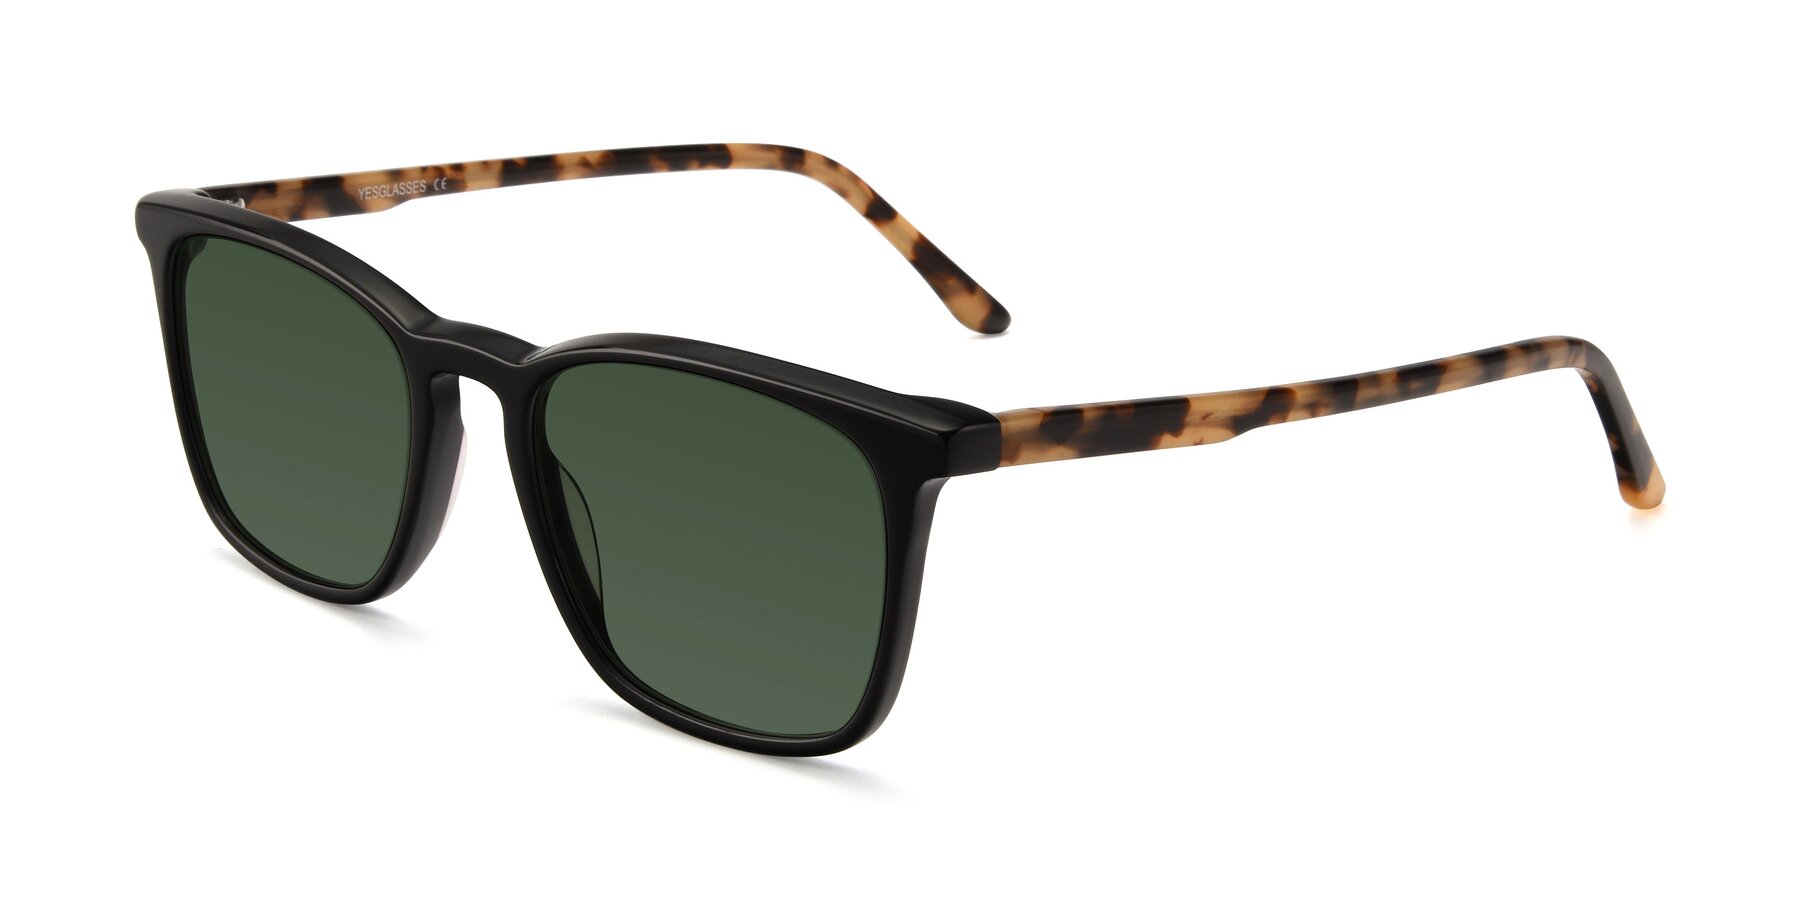 Angle of Vigor in Black-Tortoise with Green Tinted Lenses